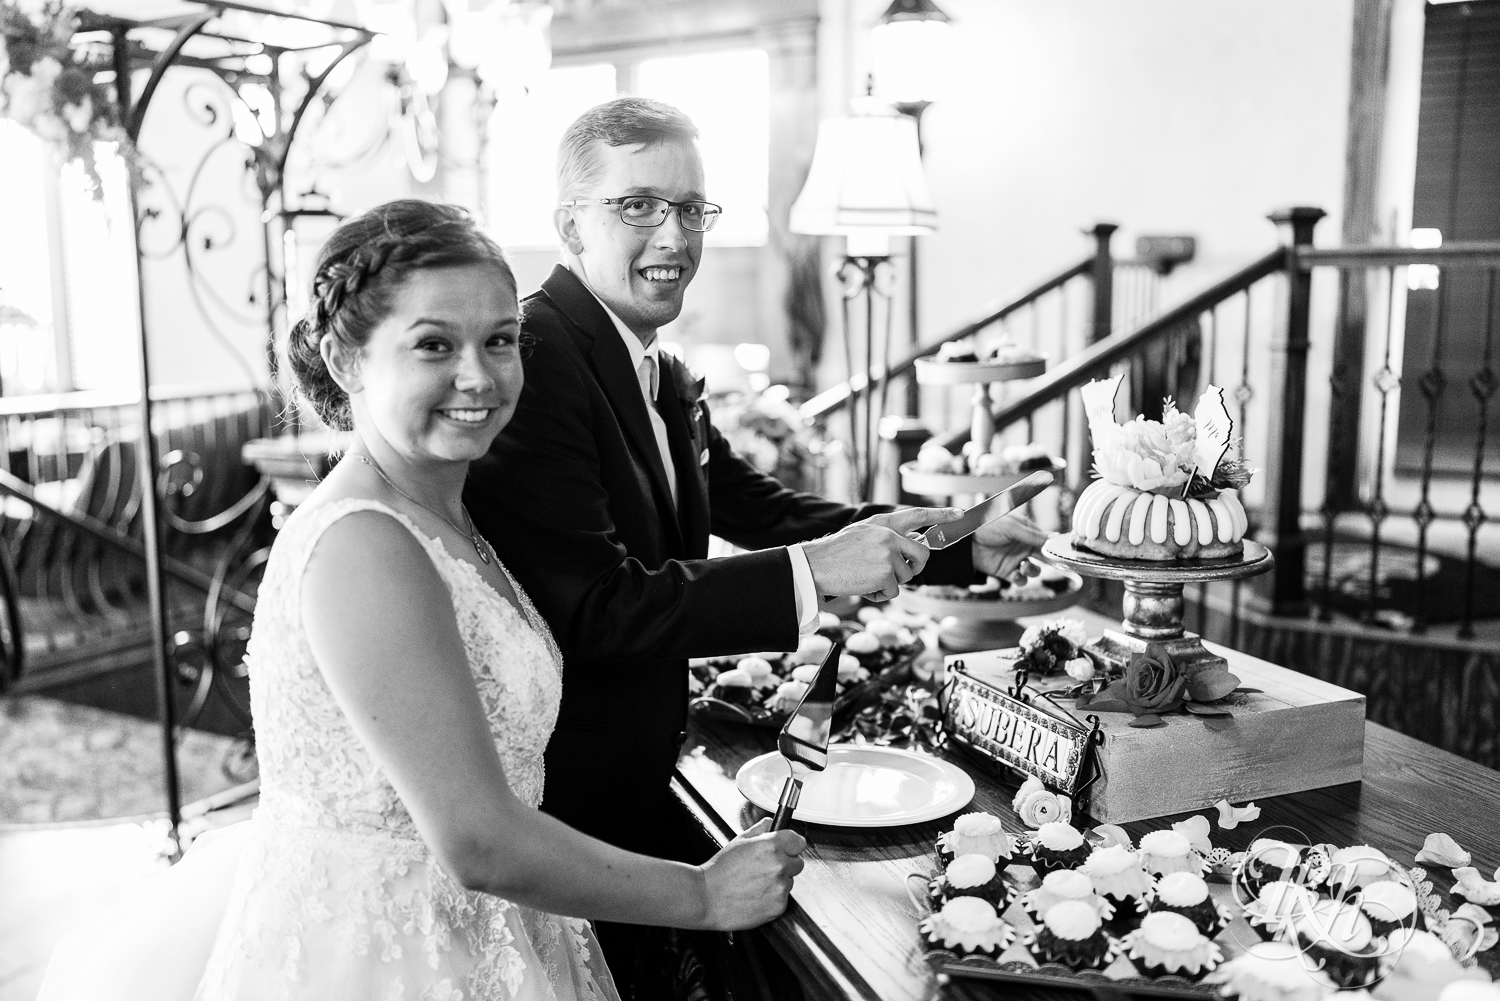 Bride and groom cut cake at wedding reception at Kellerman's Event Center in White Bear Lake, Minnesota.